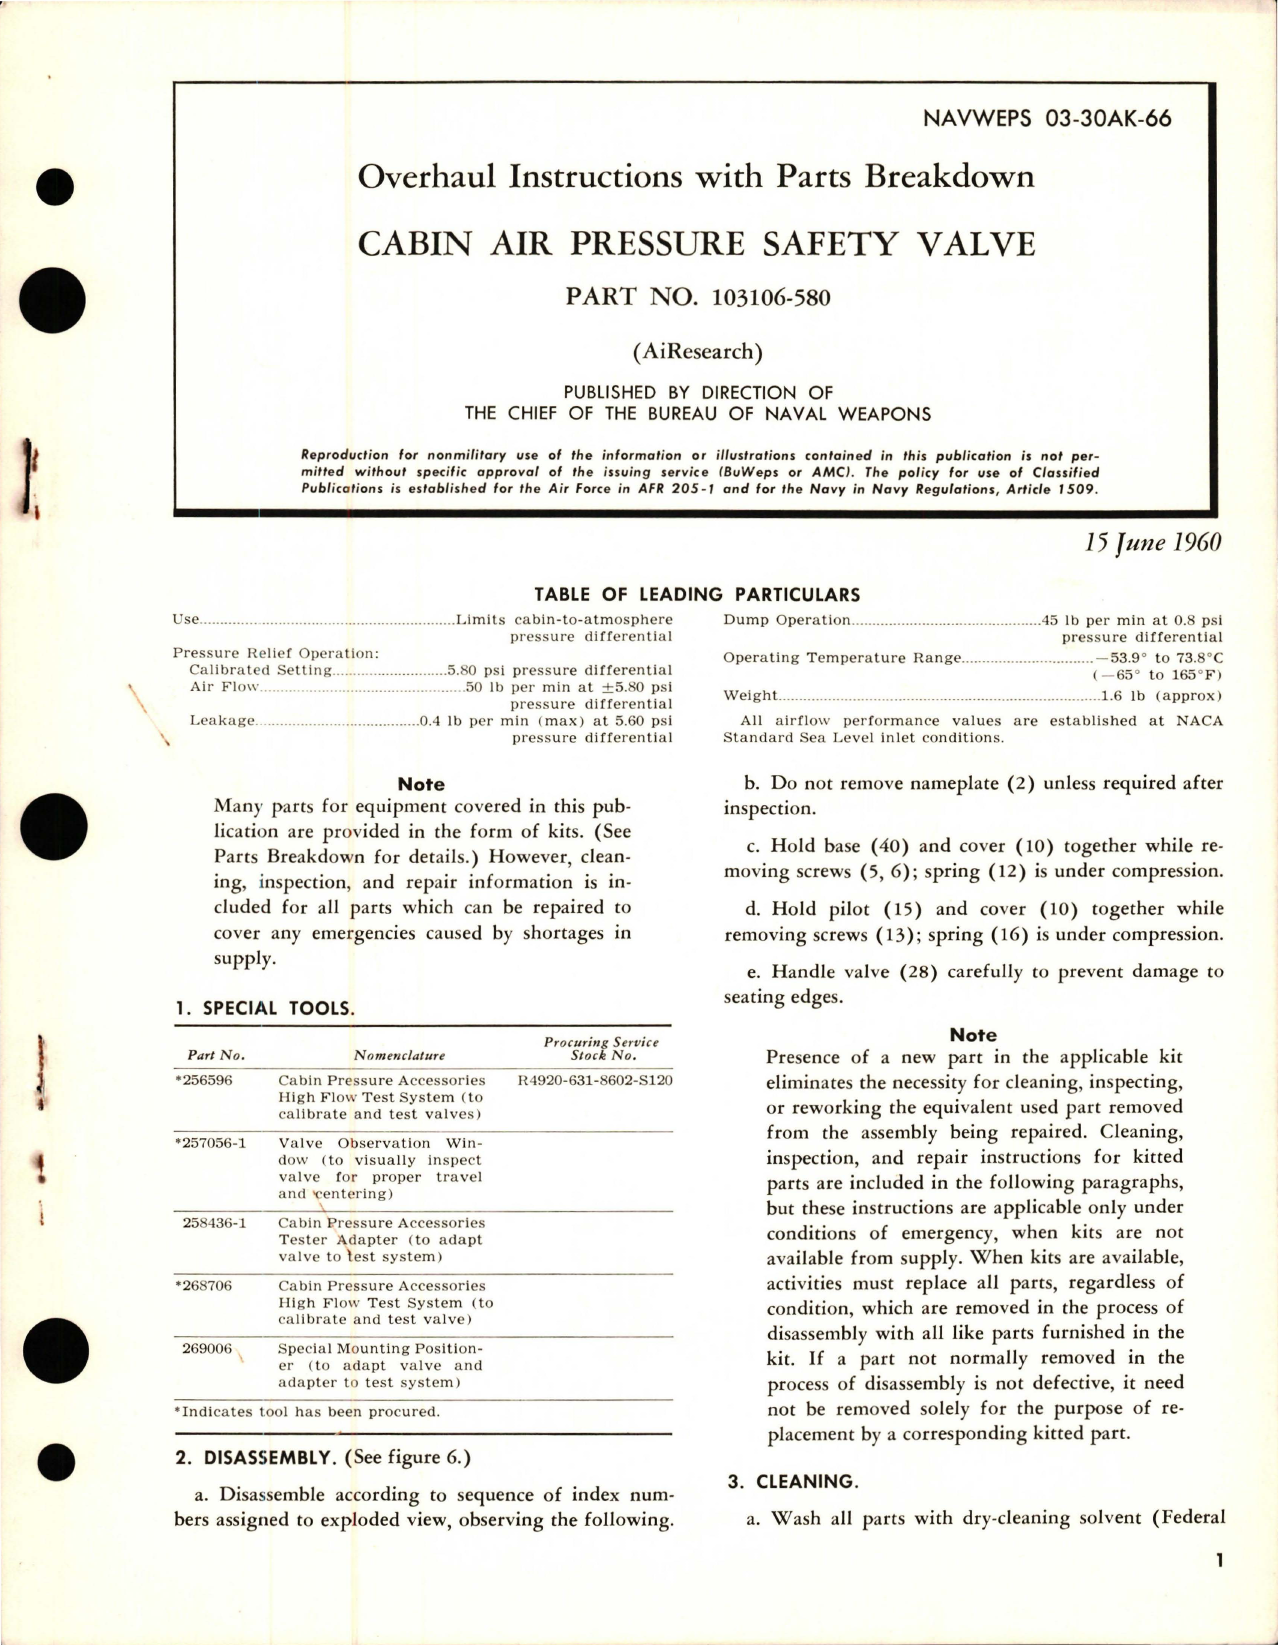 Sample page 1 from AirCorps Library document: Overhaul Instructions with Parts Breakdown for Cabin Air Pressure Safety Valve - Part 103106-580